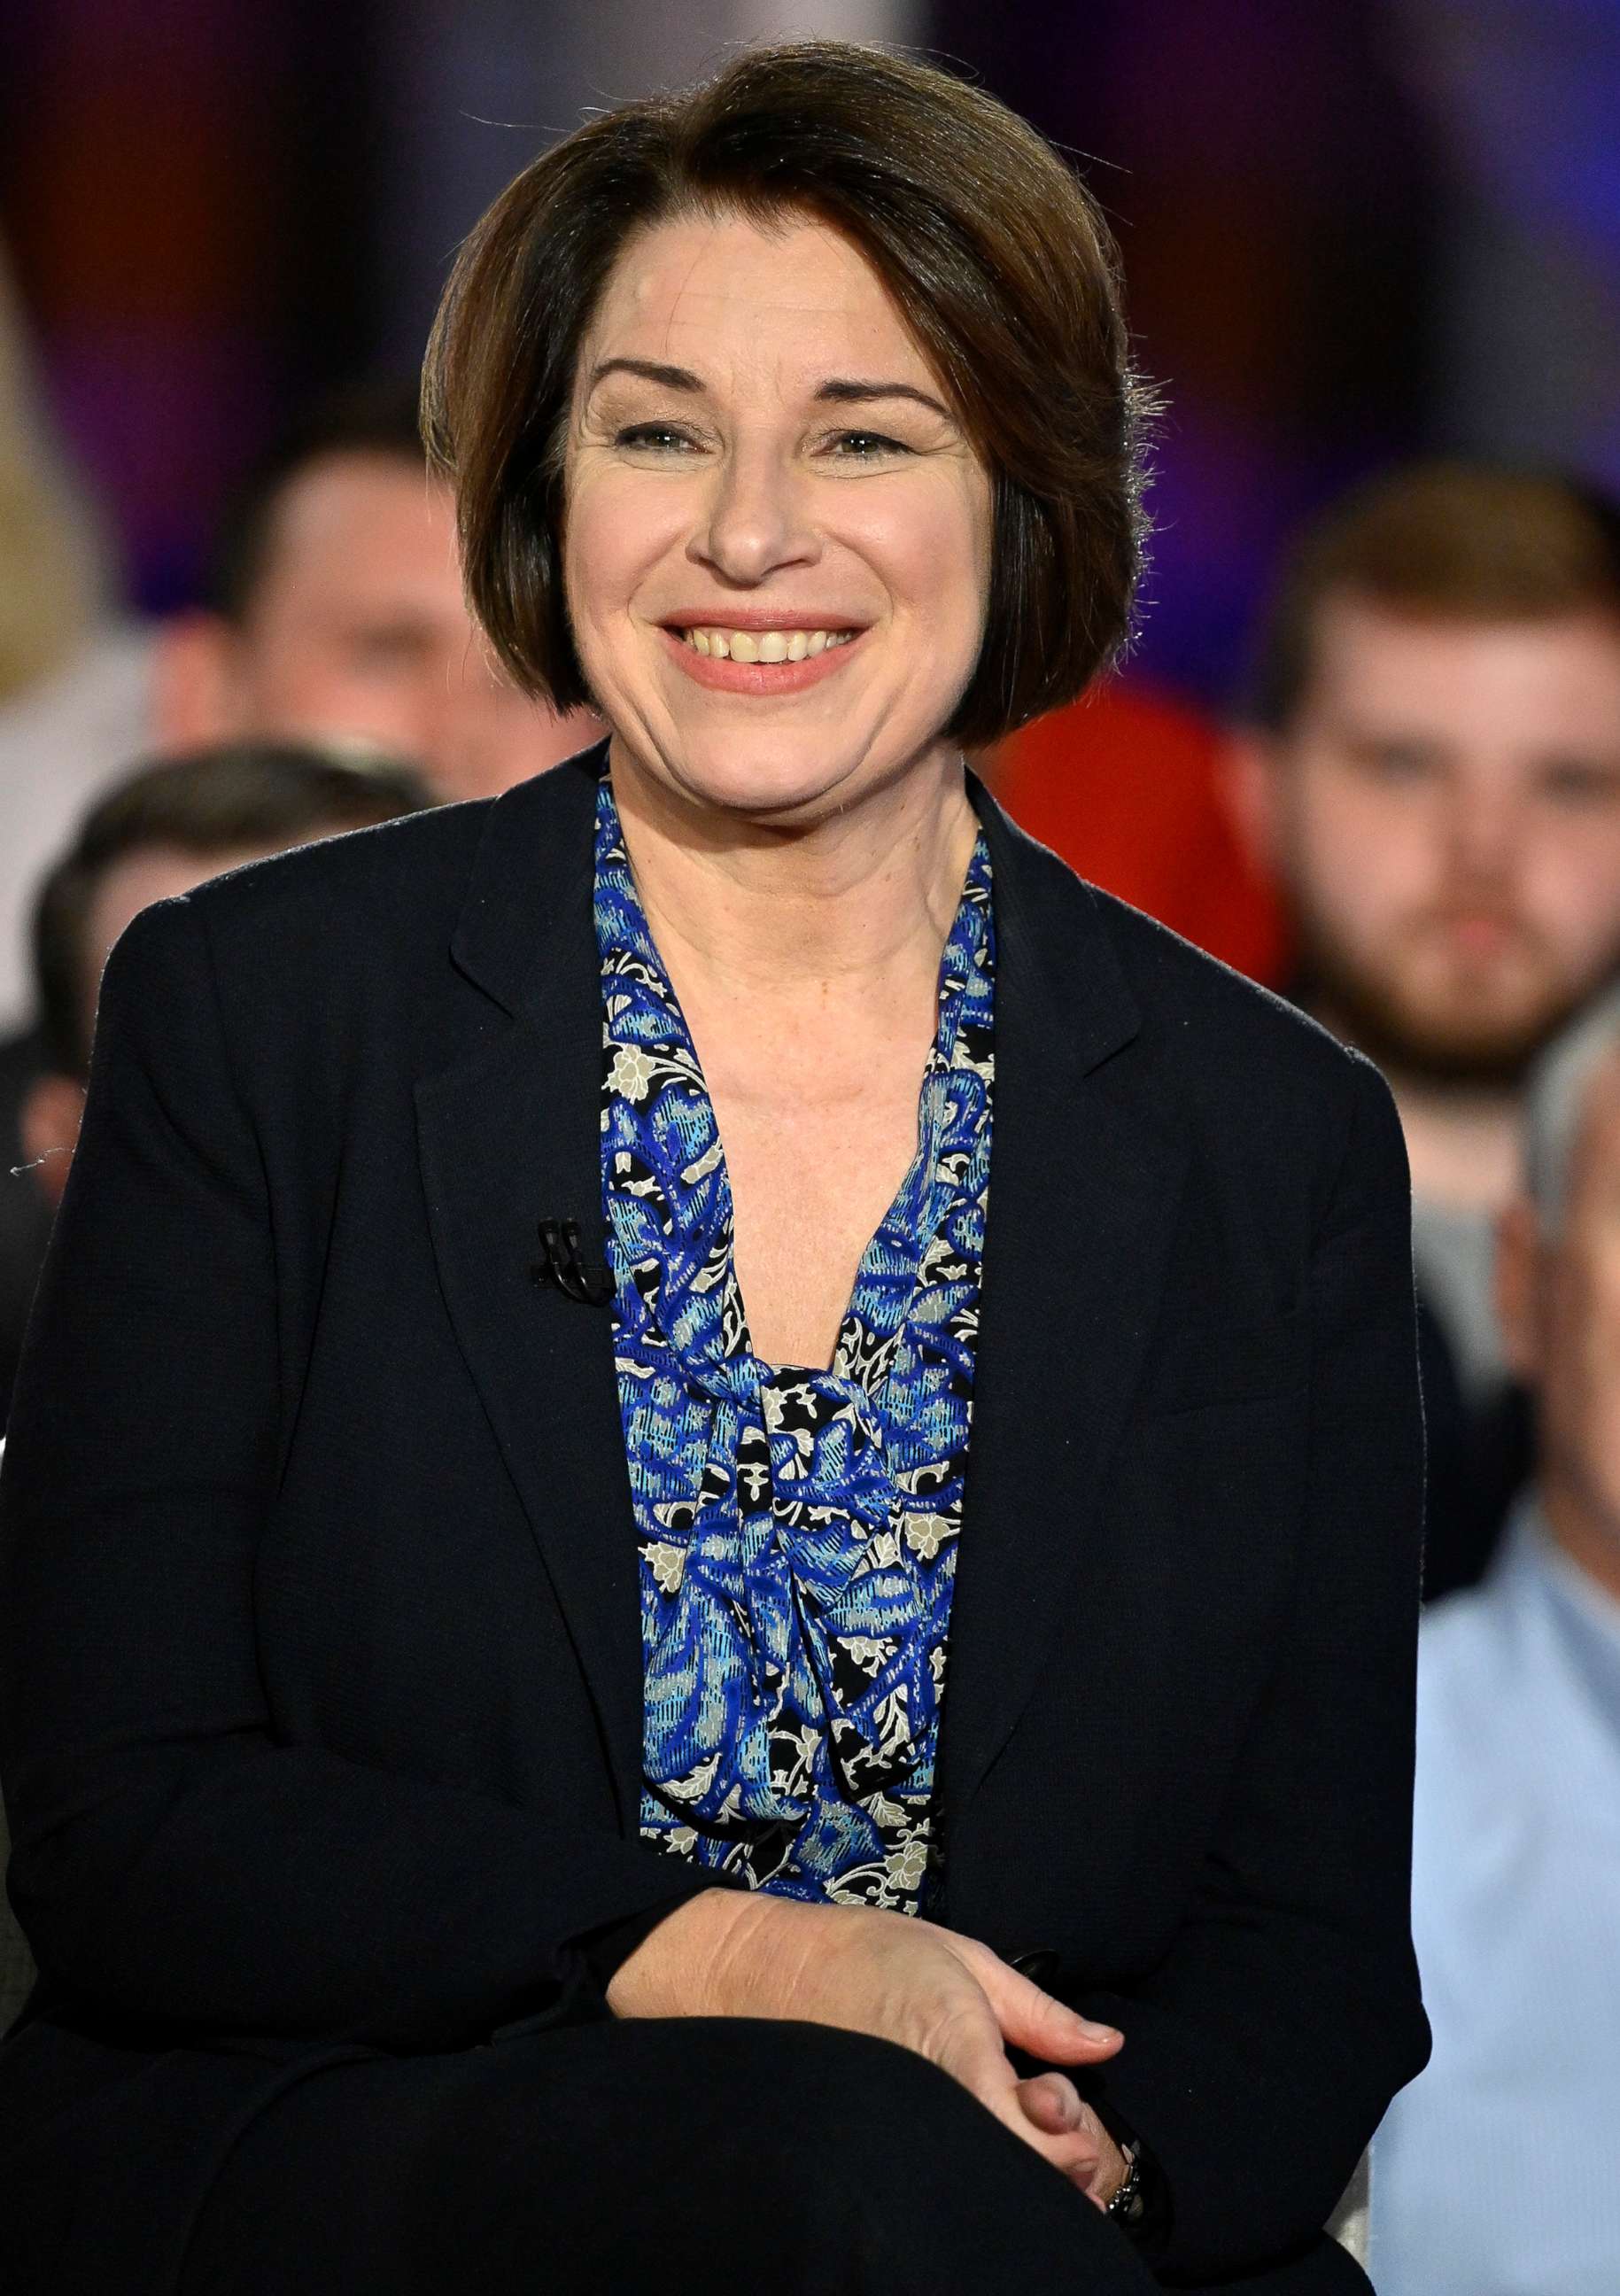 PHOTO: Sen. Amy Klobuchar participates in a Fox News Channel town hall co-moderated by Bret Baier and Martha MacCallum at Cypress Manor on Feb. 27, 2020, in Raleigh, North Carolina.